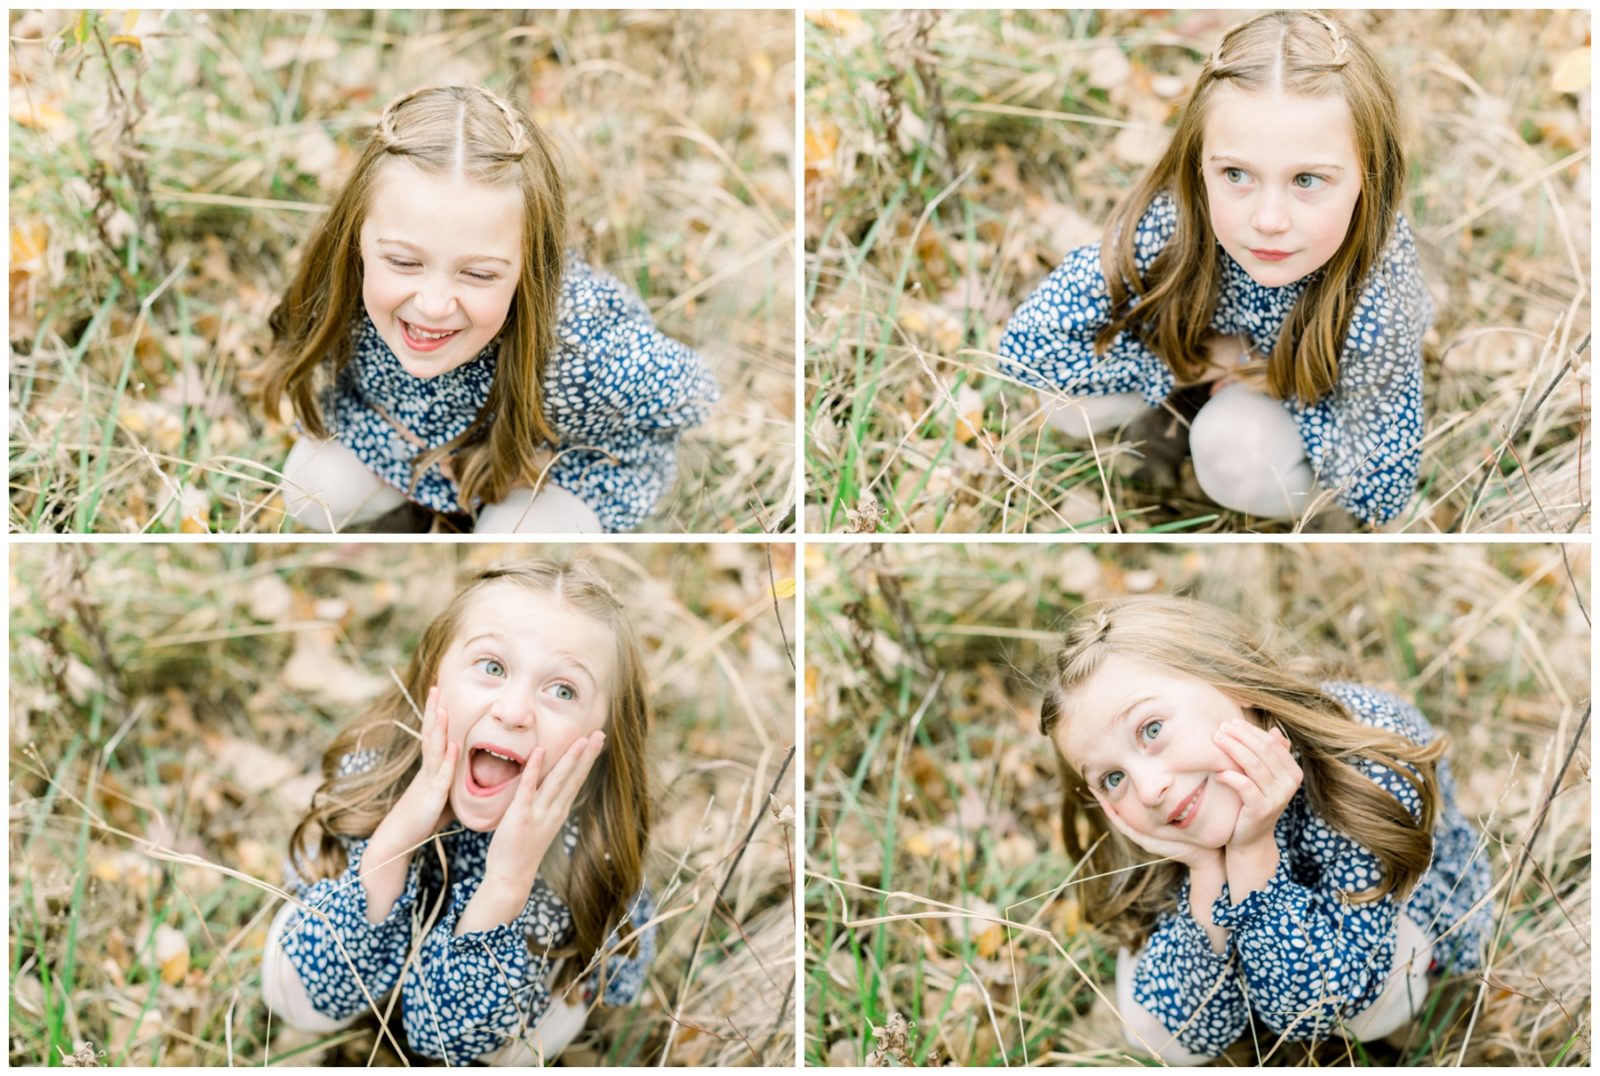 Golden Hour Fall Family Photos, composite of girl with many expressions